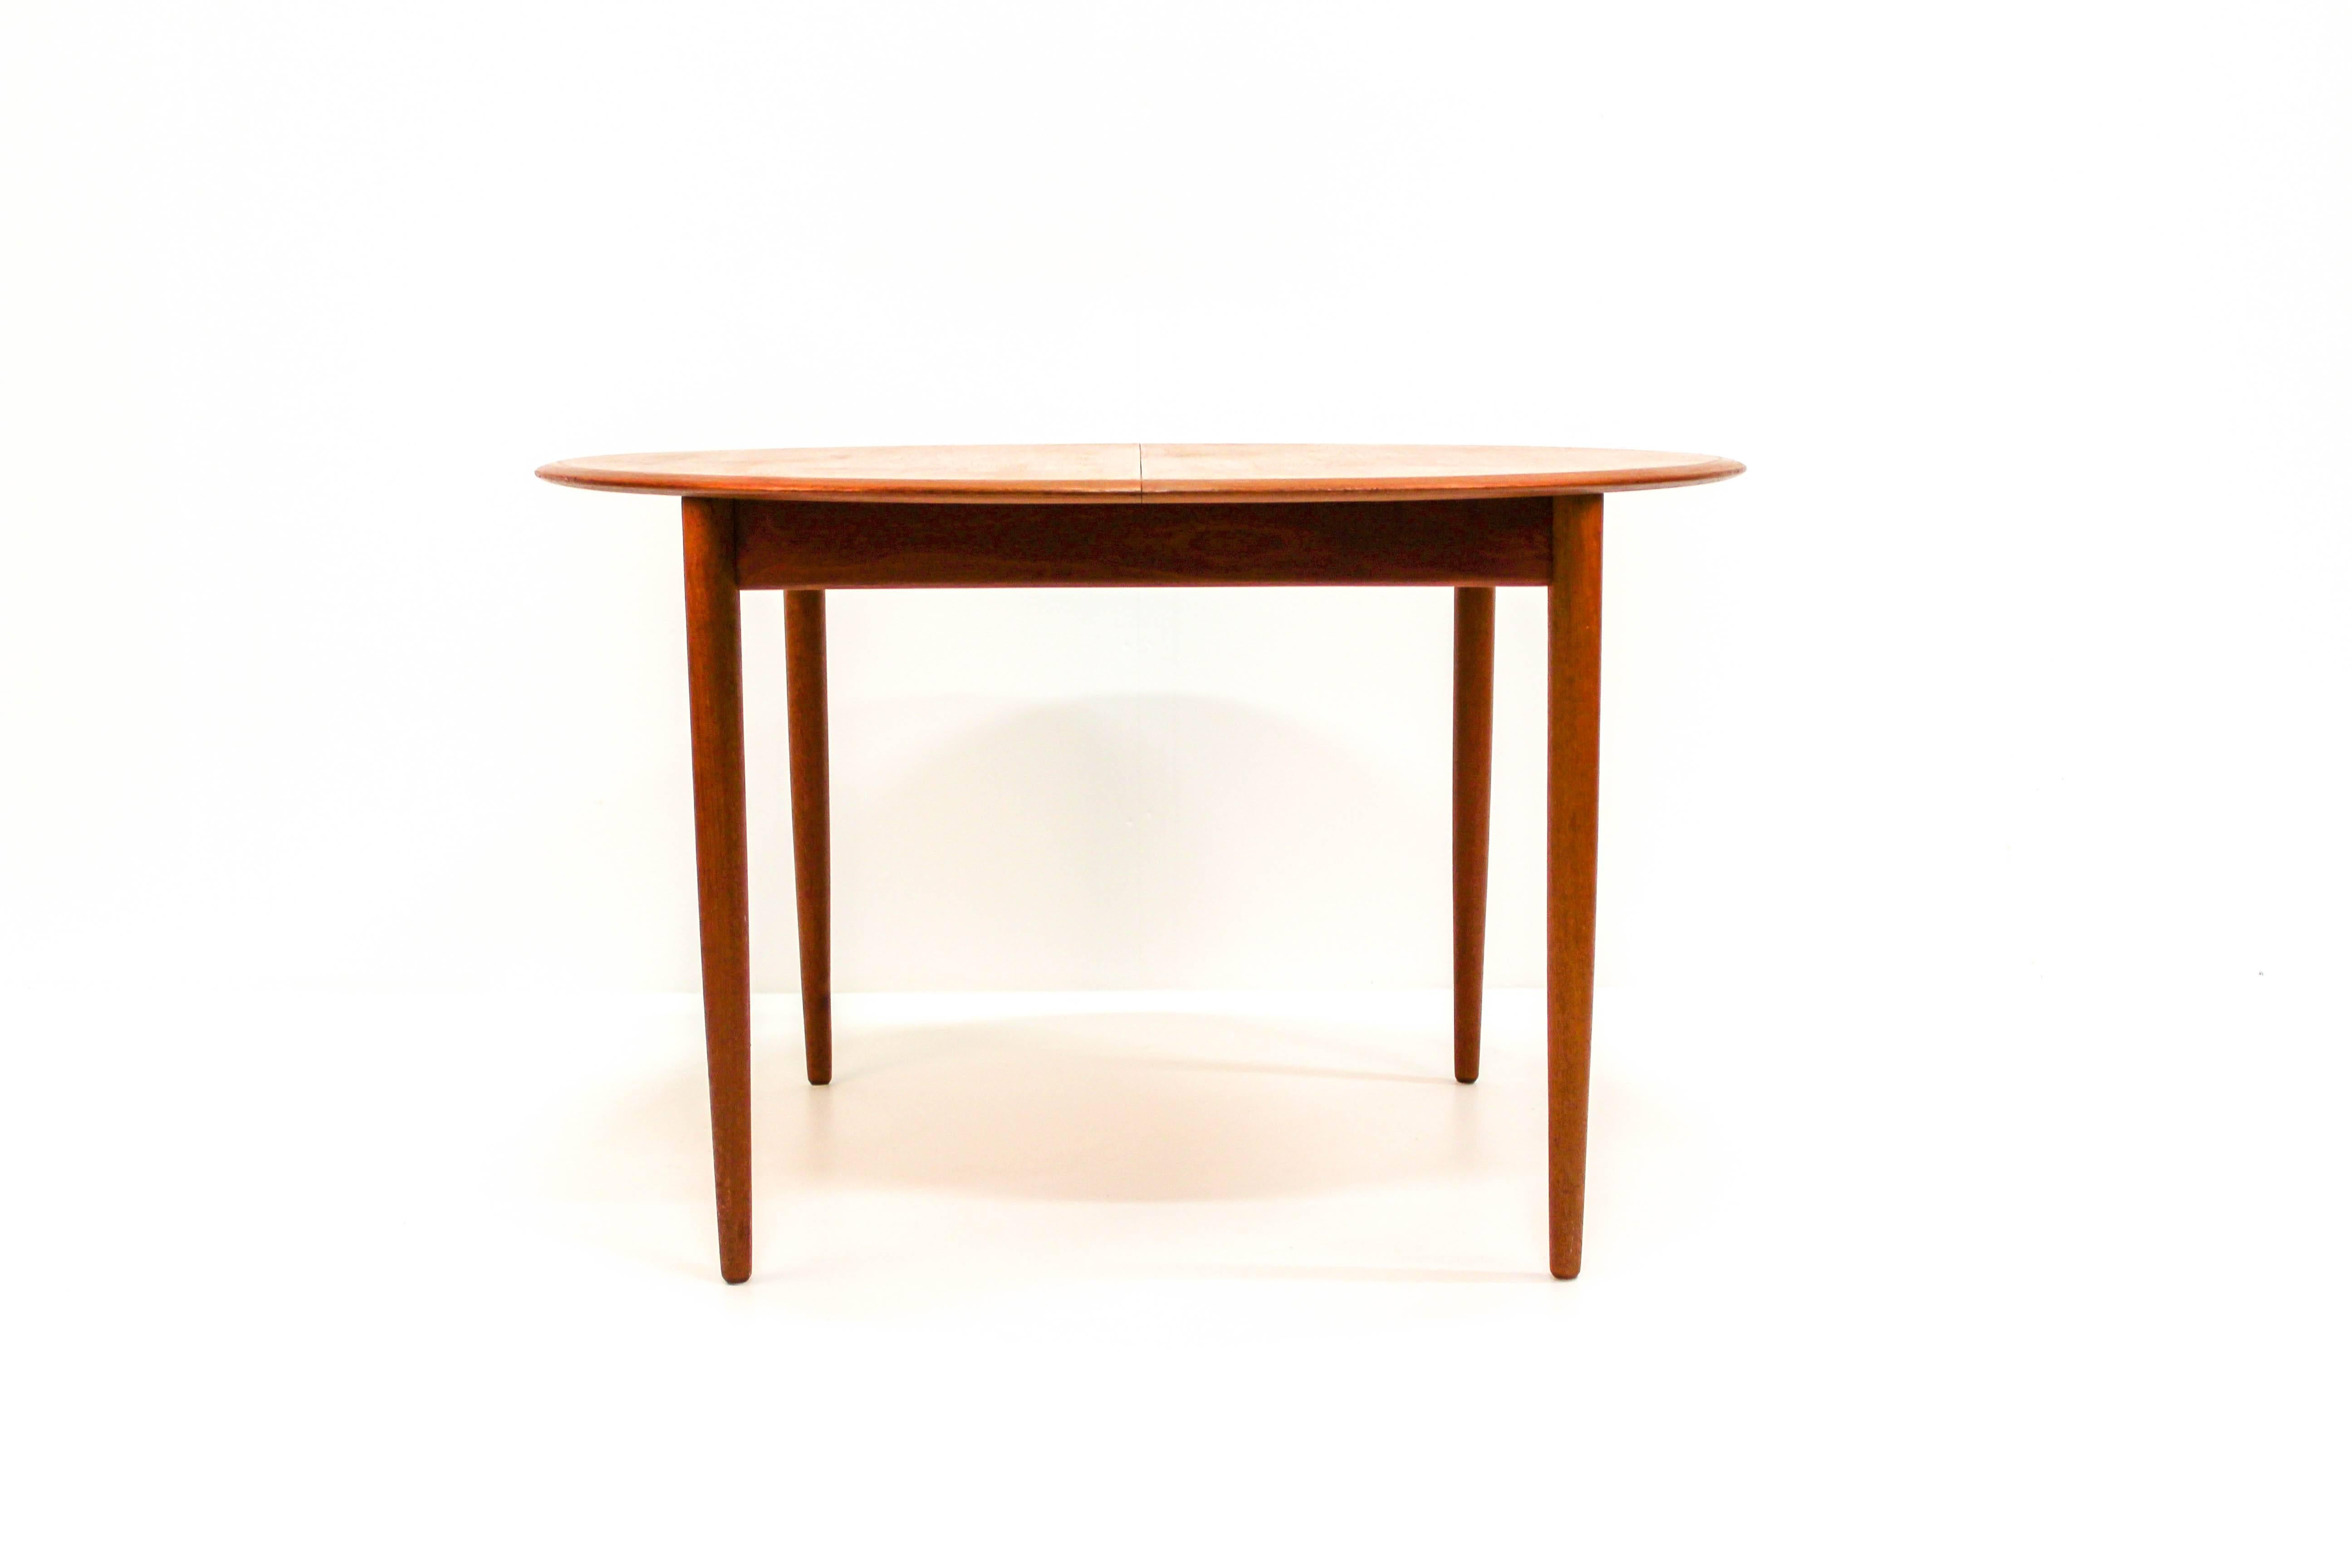 Midcentury Danish dining table designed by Arne Hovmand-Olsen and produced by Mogens Kold. The table has a built-in fold-up leaf and nice details such as tapered solid teak legs. 

The table is in very good vintage condition with minor signs of